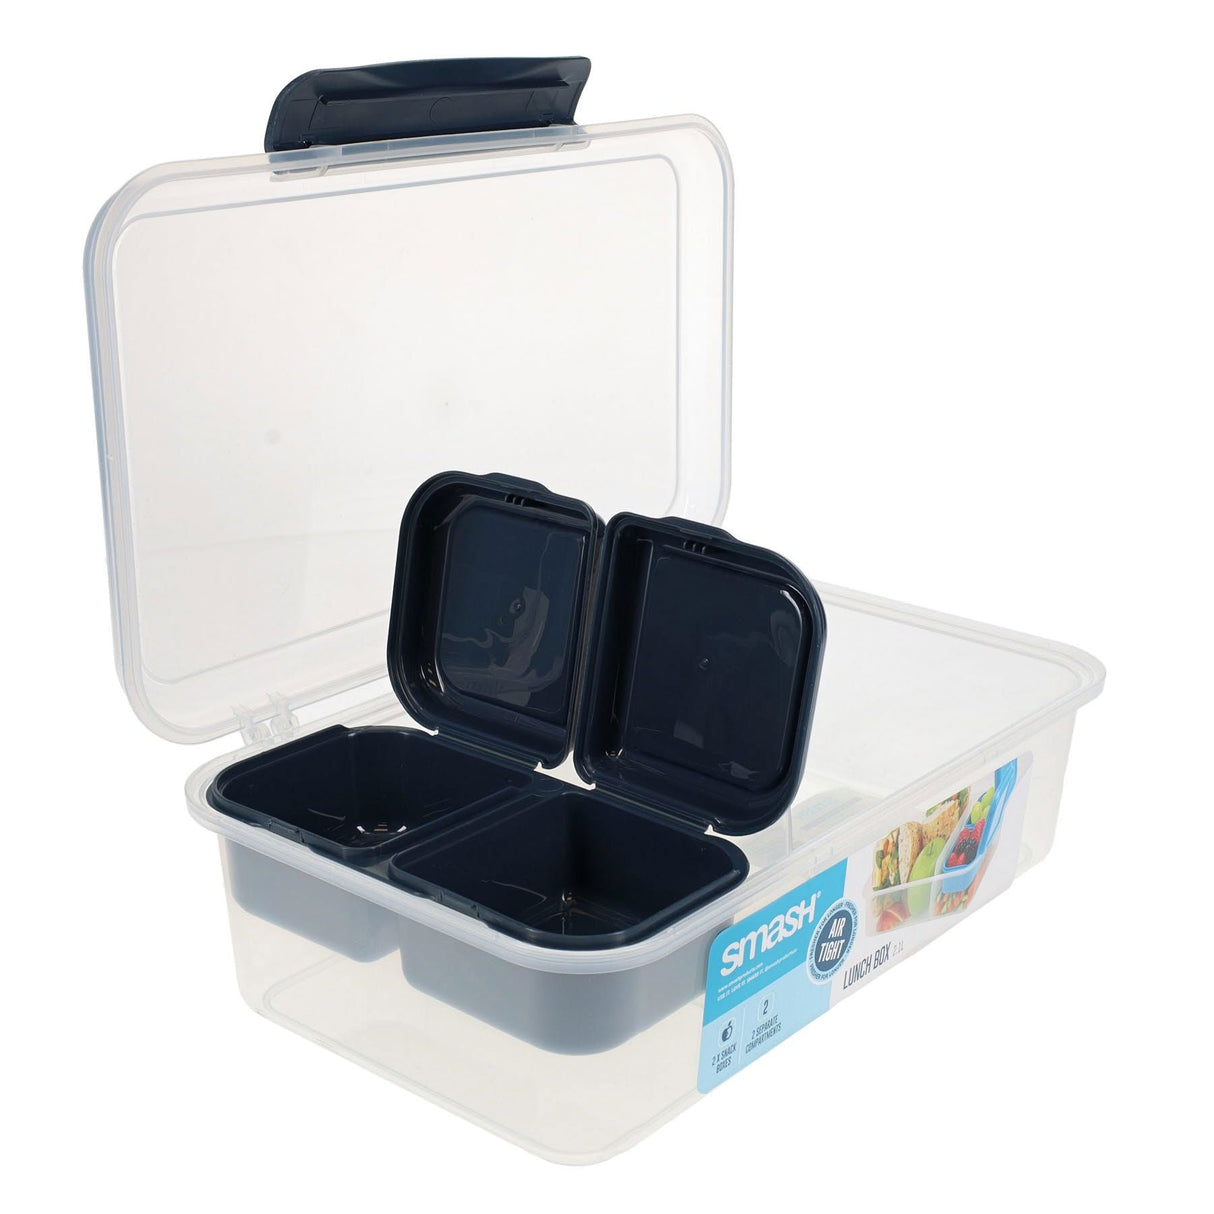 Smash Leakproof Box with Removable Compartment - 2.1L - Black-Lunch Boxes-Smash|StationeryShop.co.uk